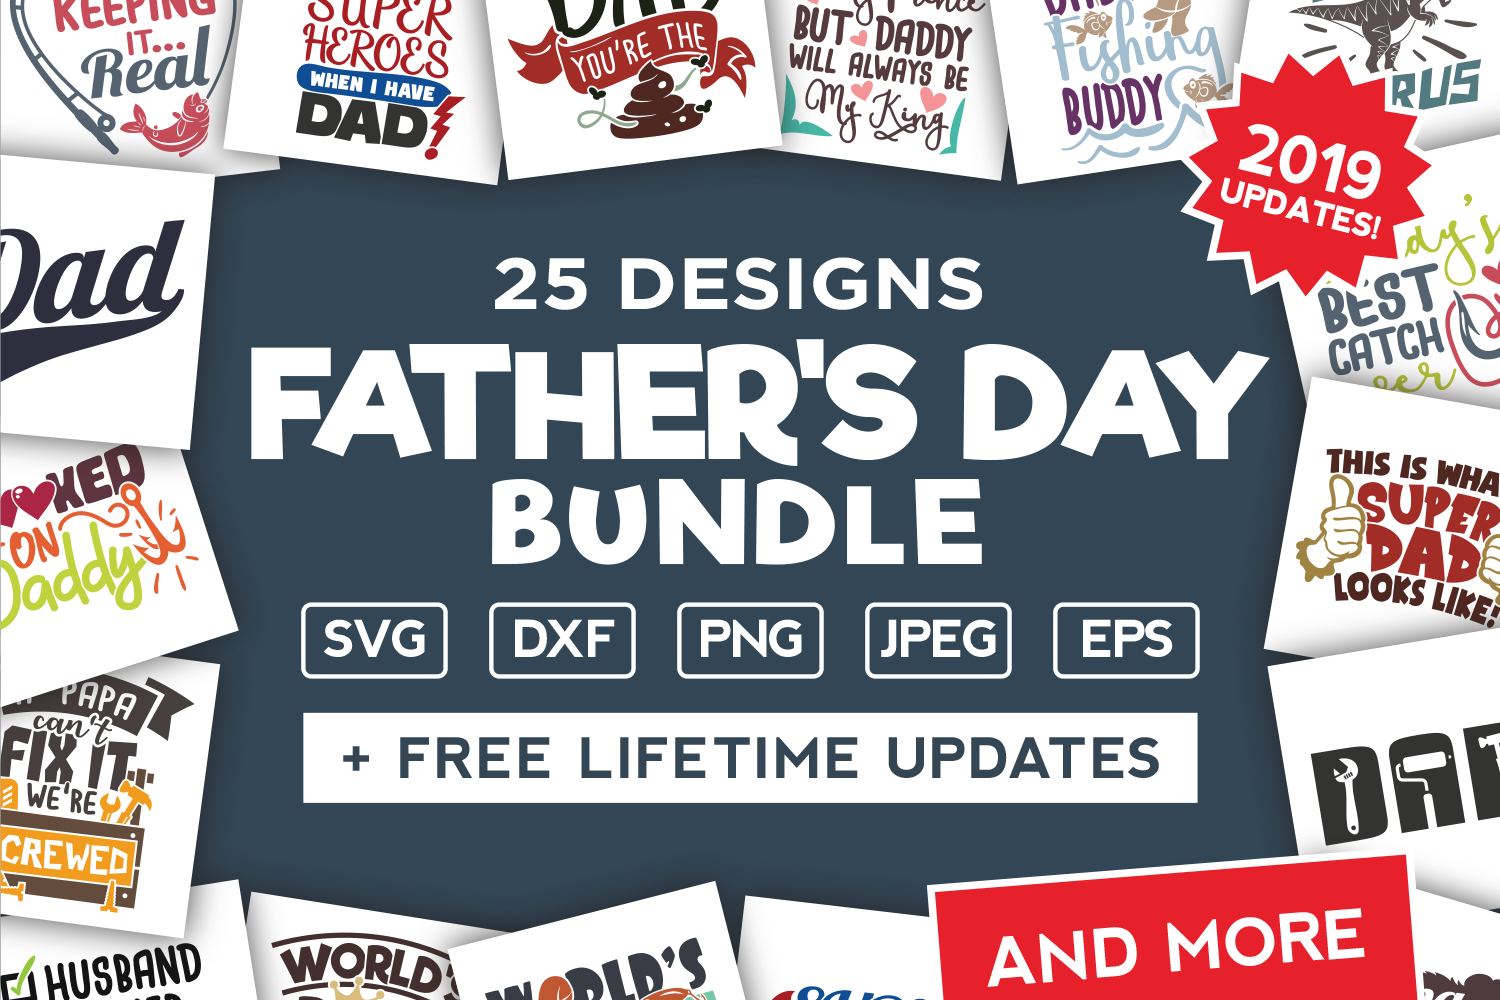 Free Free 150 Day Svg Father Of All Things Svg SVG PNG EPS DXF File